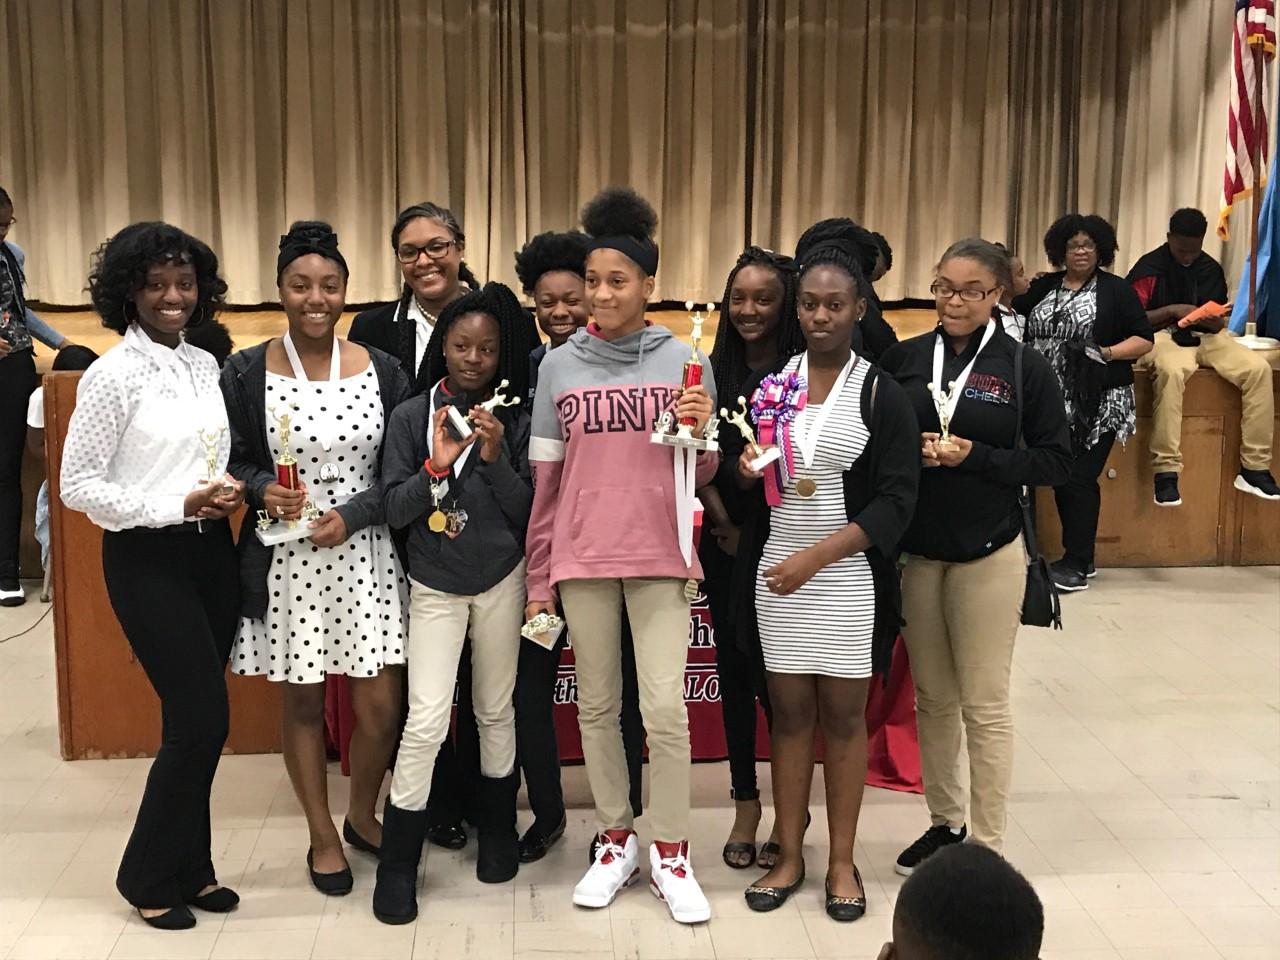 Baker Middle School athletes in group photo at the 2017 awards program